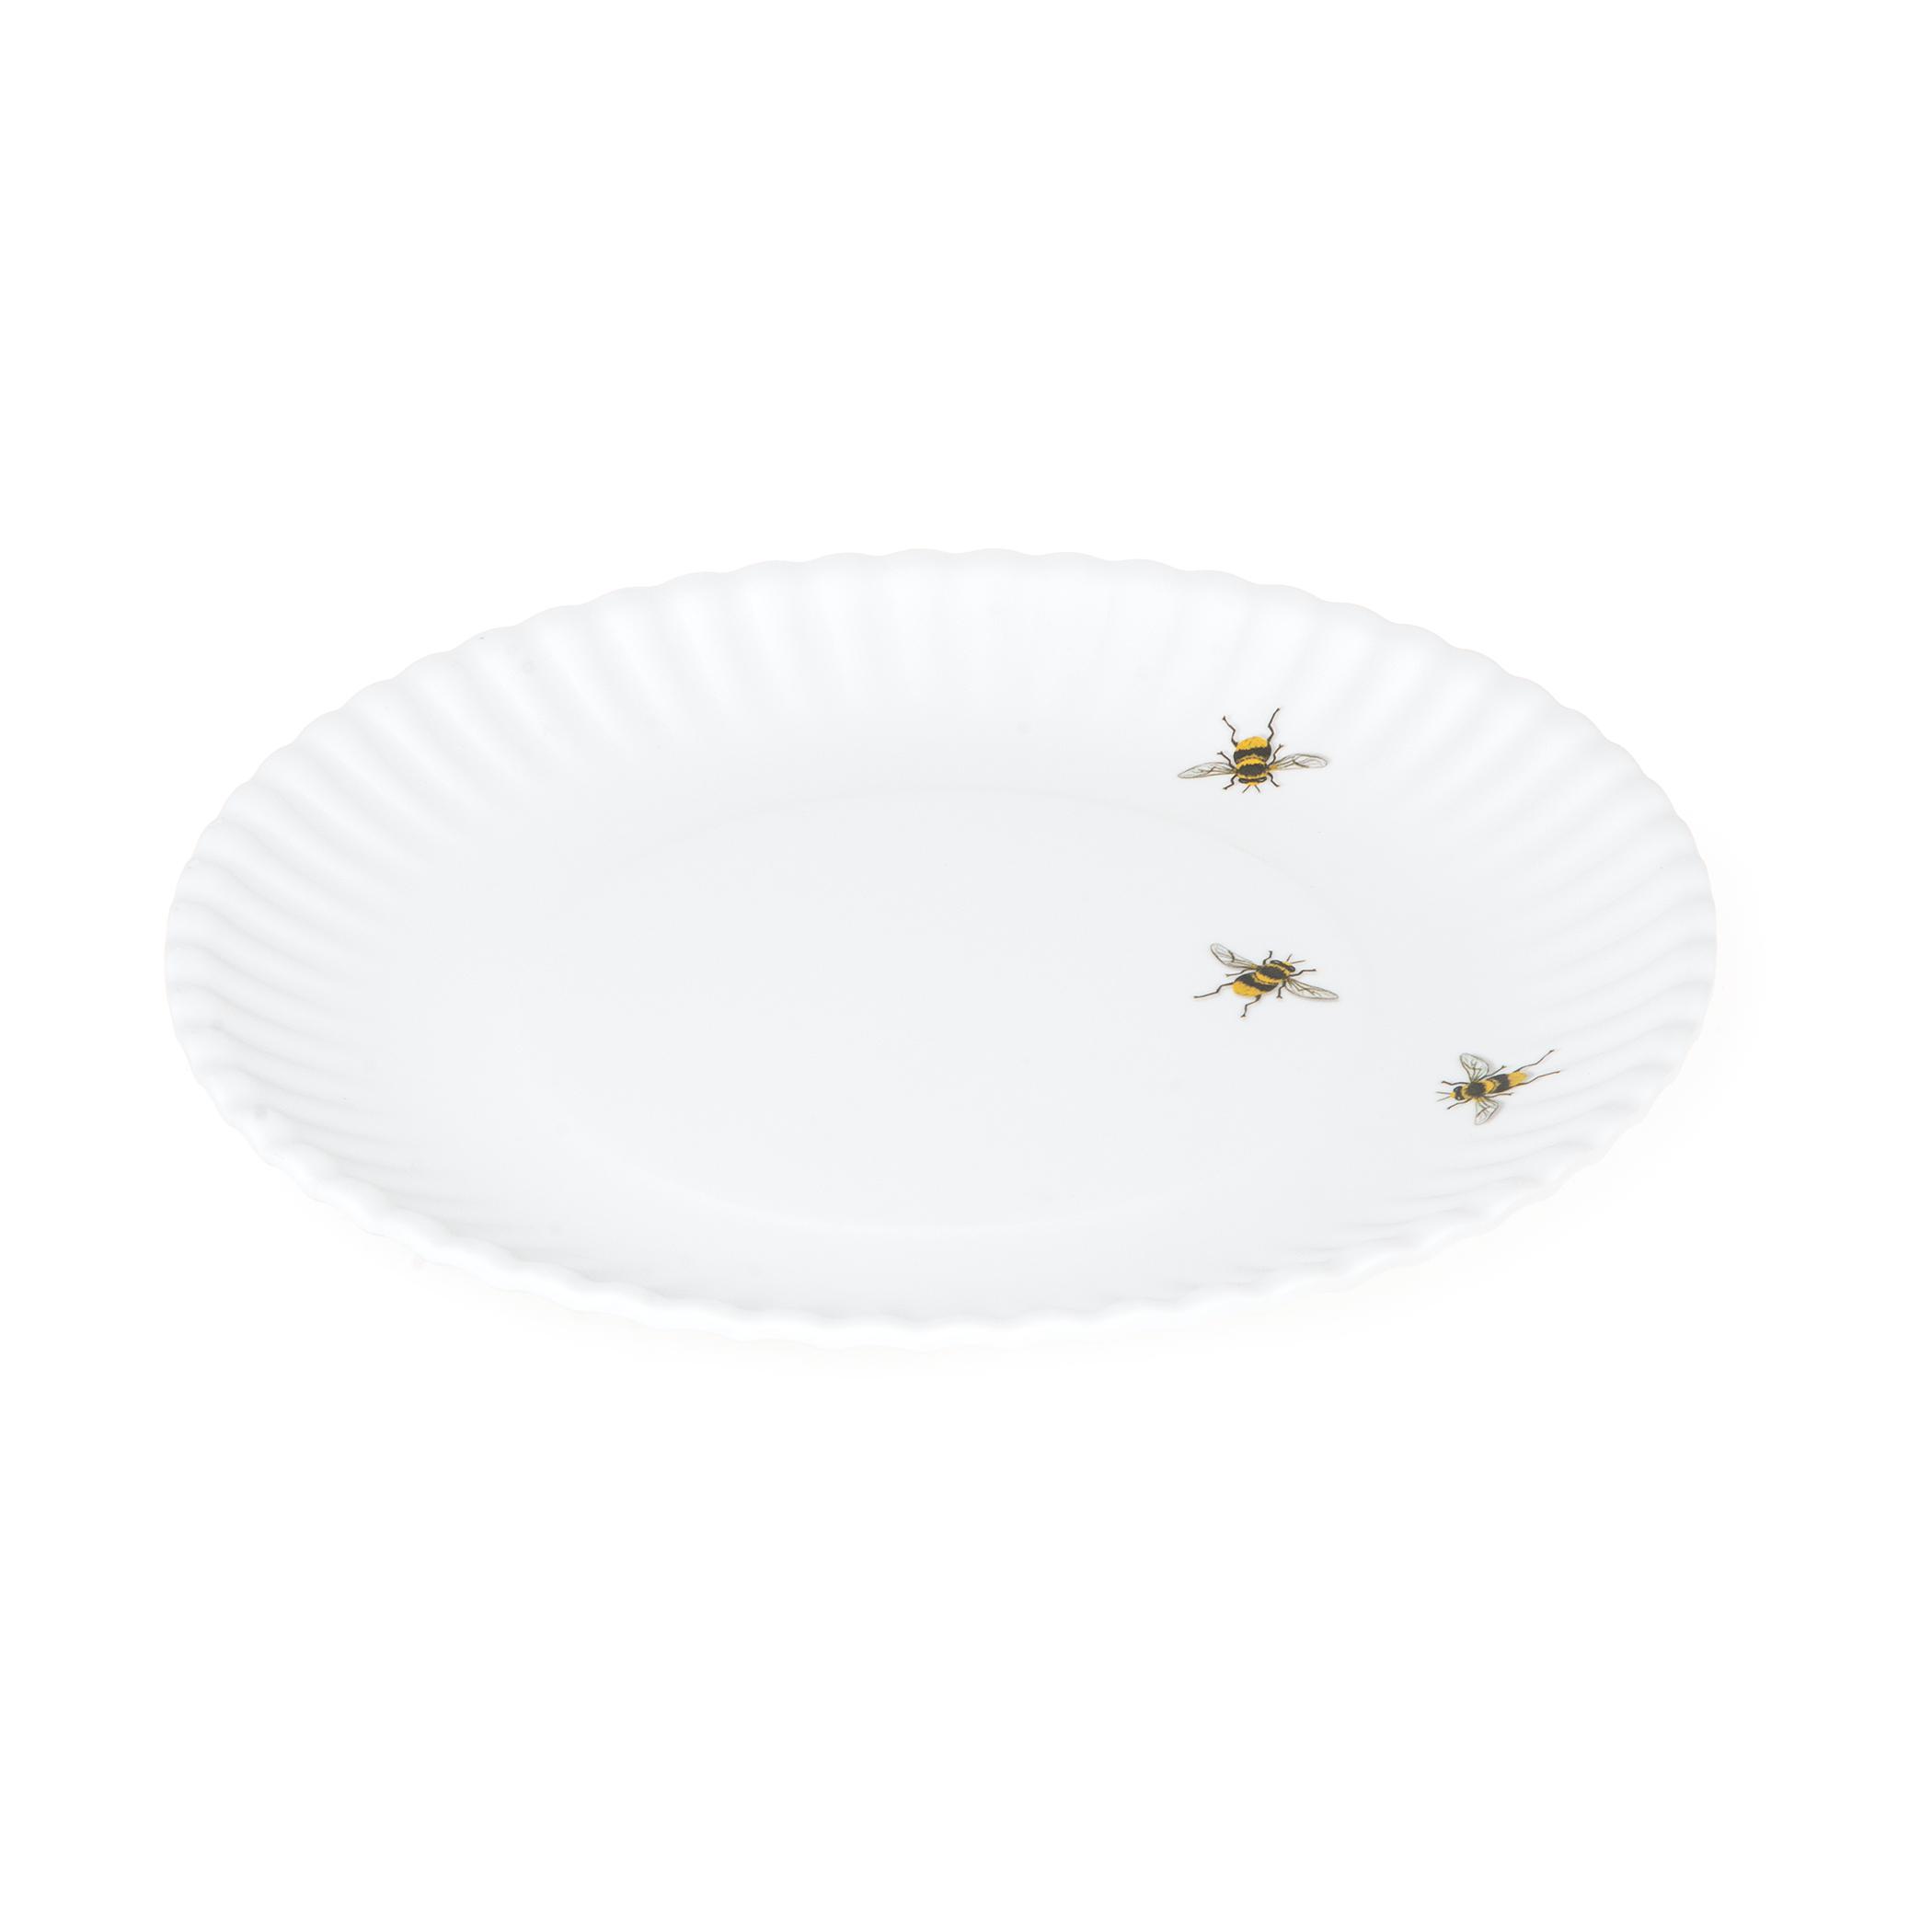  Bees Melamine Paper Plate - 9 Inch